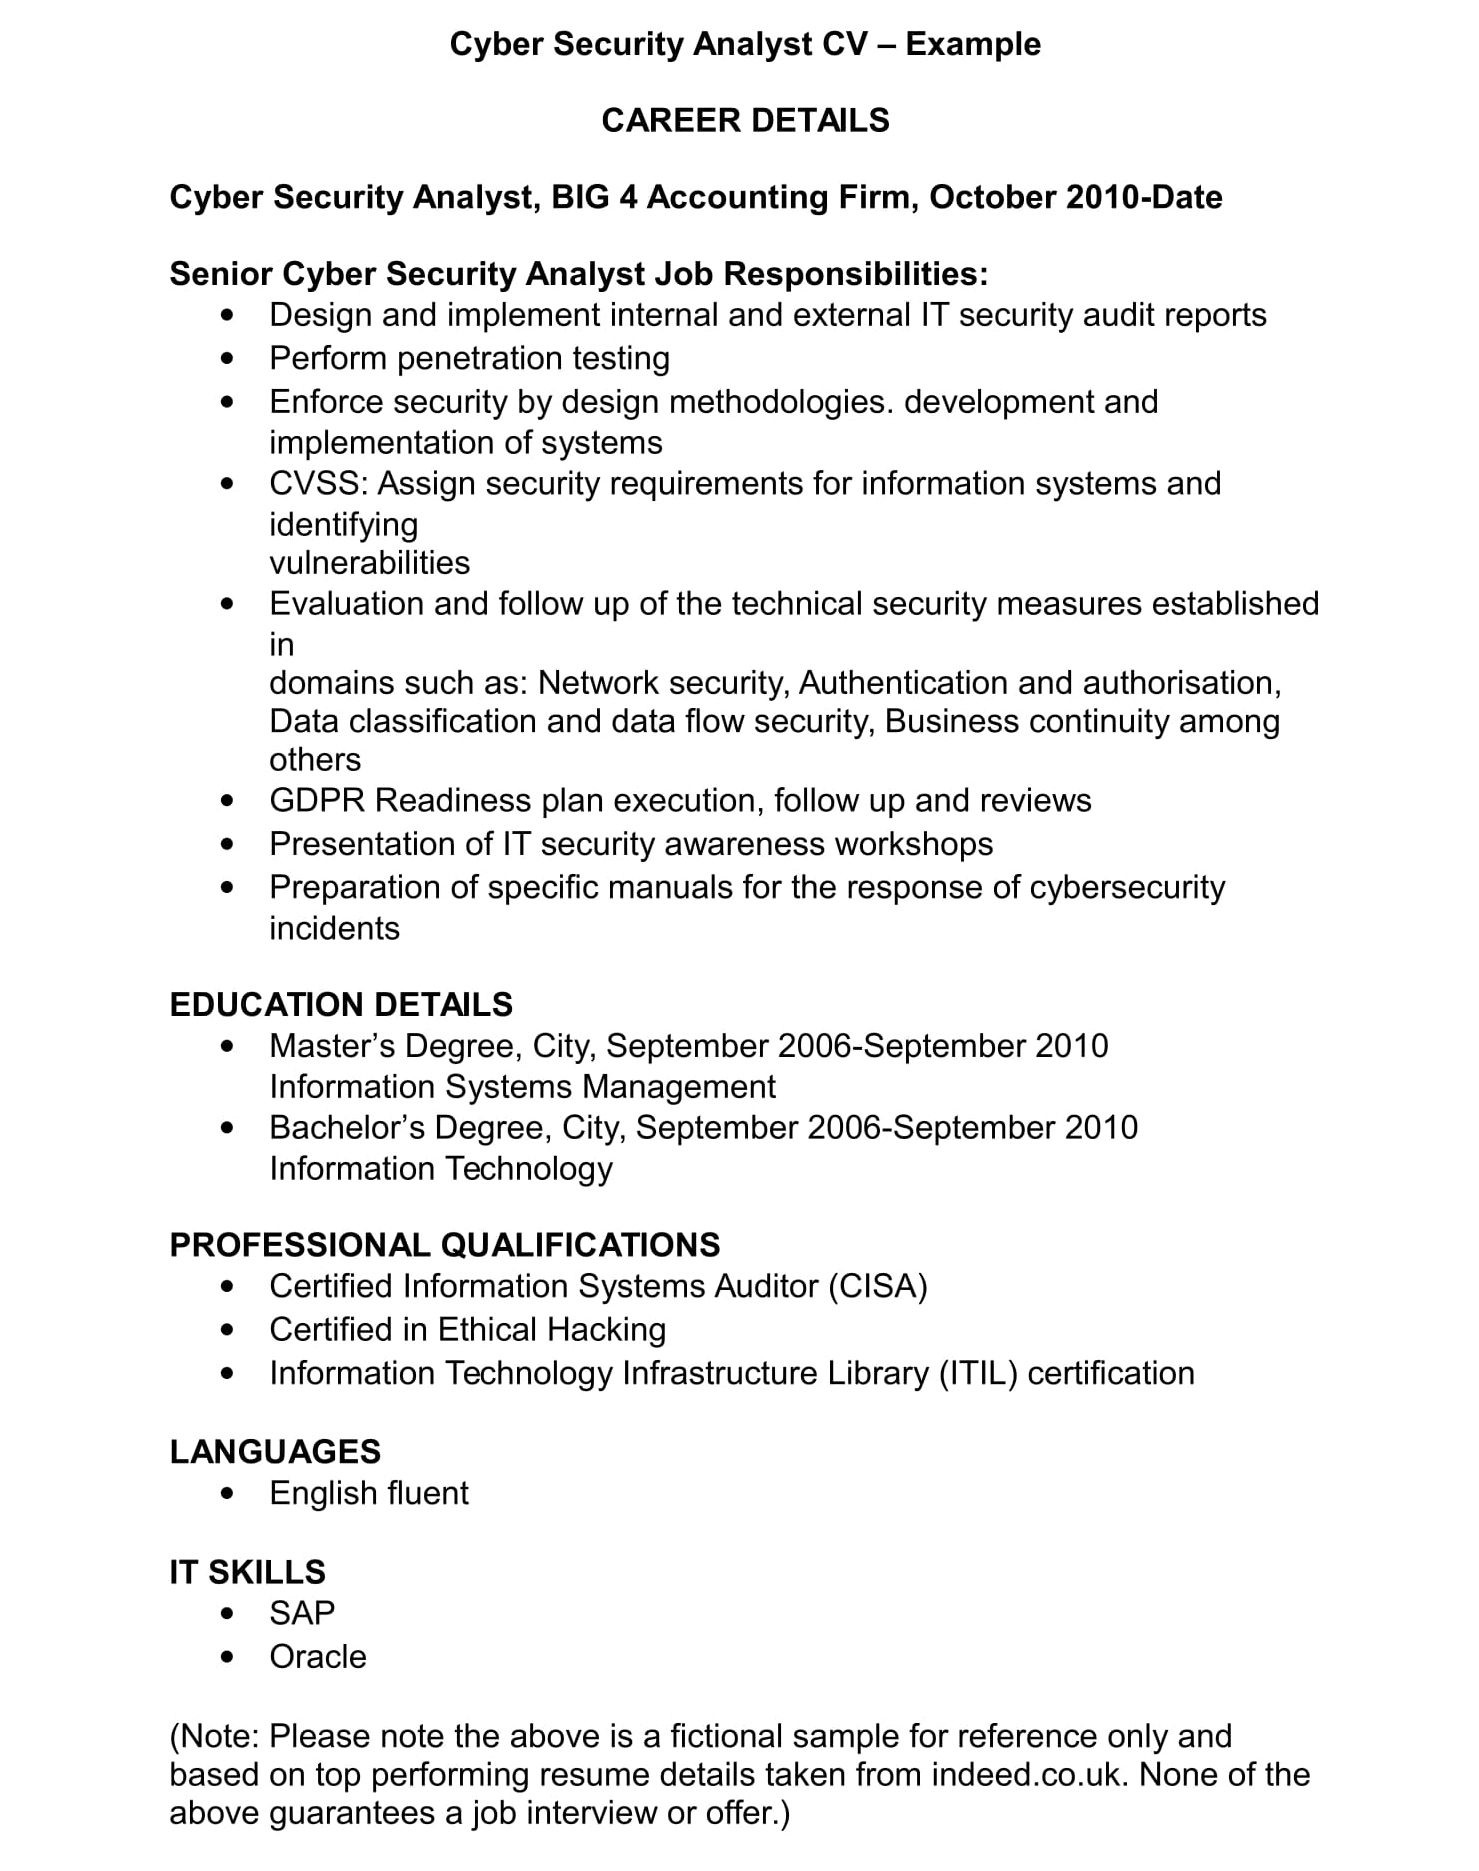 Sample Of Resume for Security Job In Aiustralia Cyber Security Cv Template Examples Audit, Finance Management